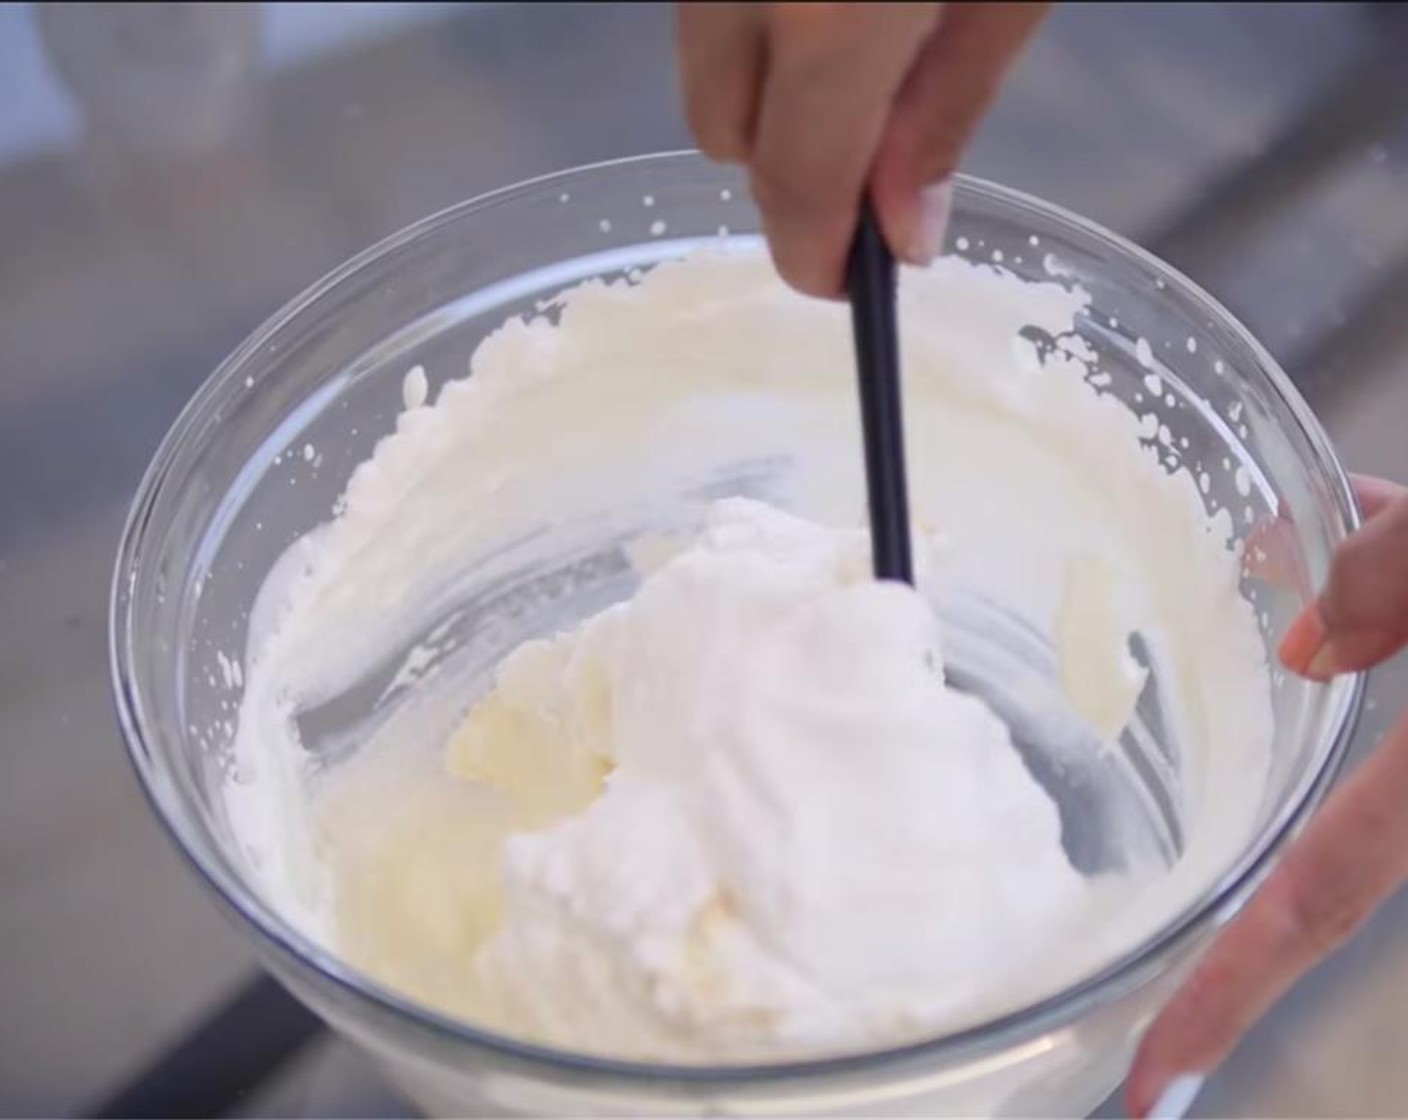 step 2 Whip Whipped Cream (to taste) in a large bowl, and gently fold in an equal amount of Mascarpone Cheese (to taste). Add in Granulated Sugar (2 Tbsp), and Vanilla Extract (1 tsp).